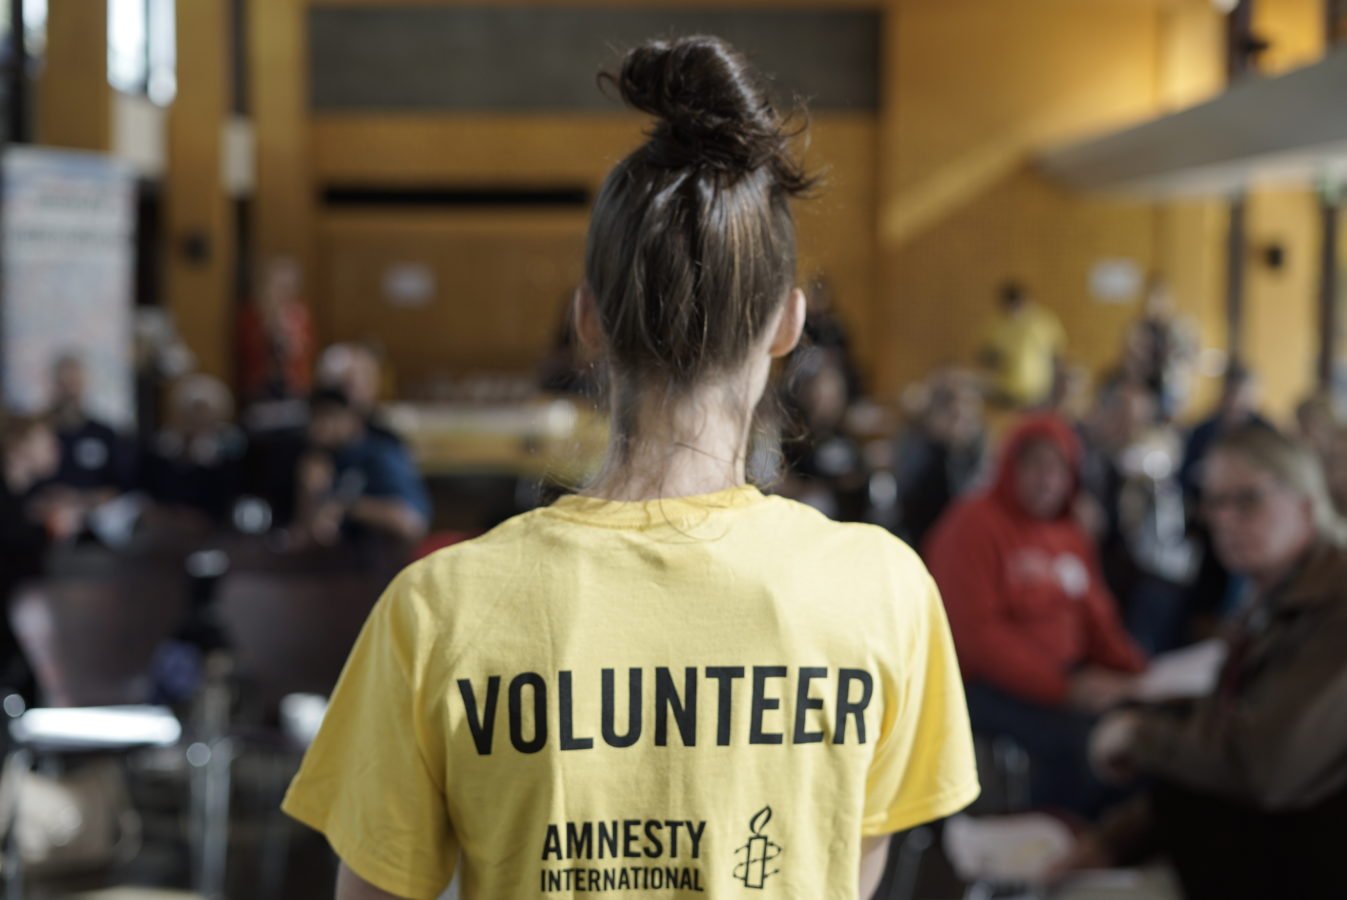 A shot of a volunteer addressing a crowd/ The shot is from behind. She is wearing a yellow shirt that says volunteer.